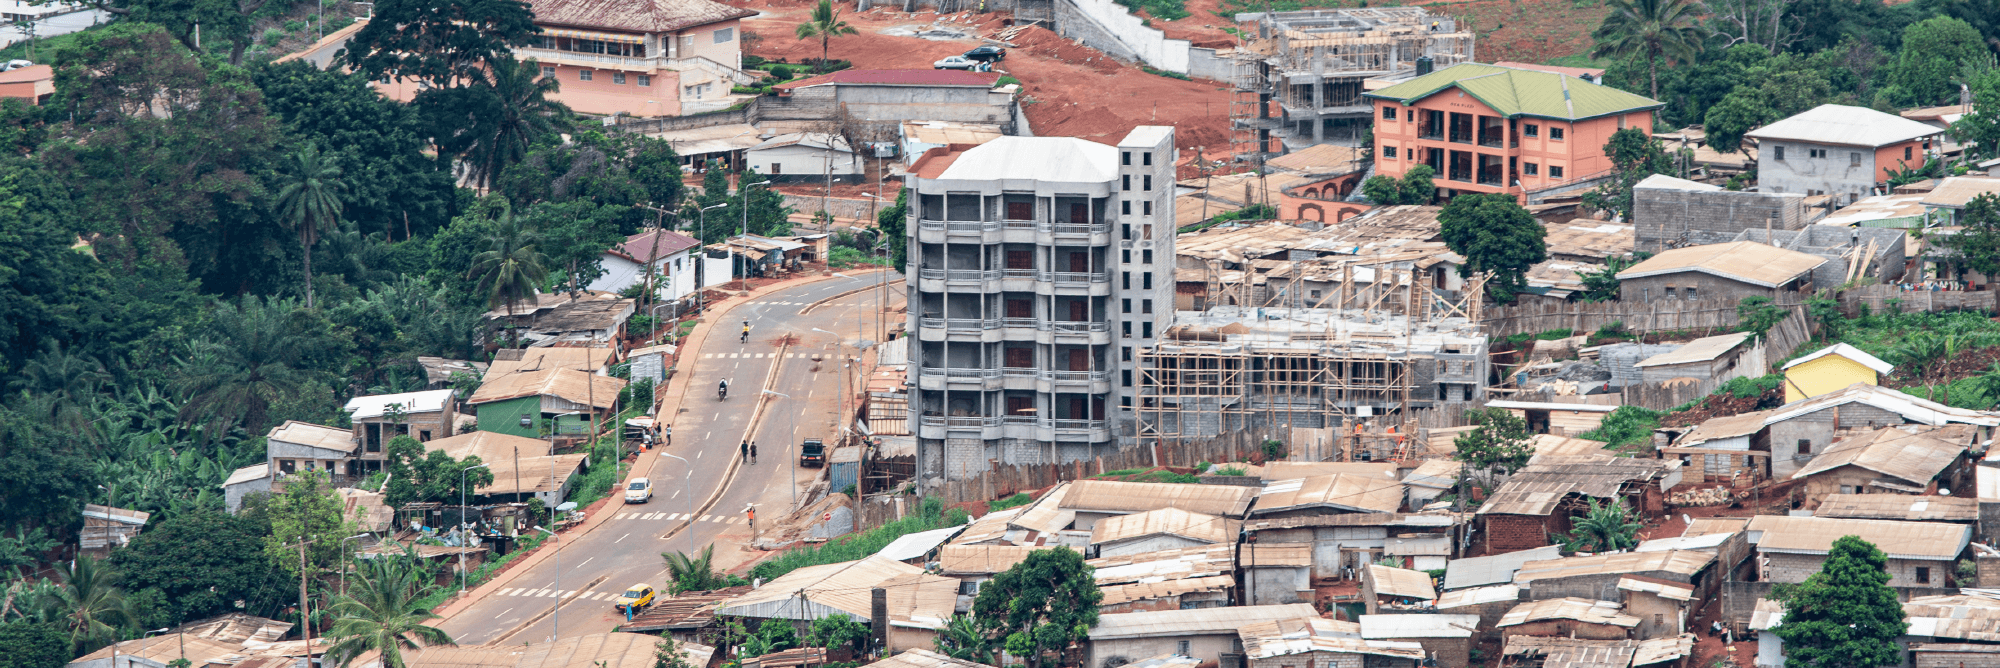 Cameroon residential landscape